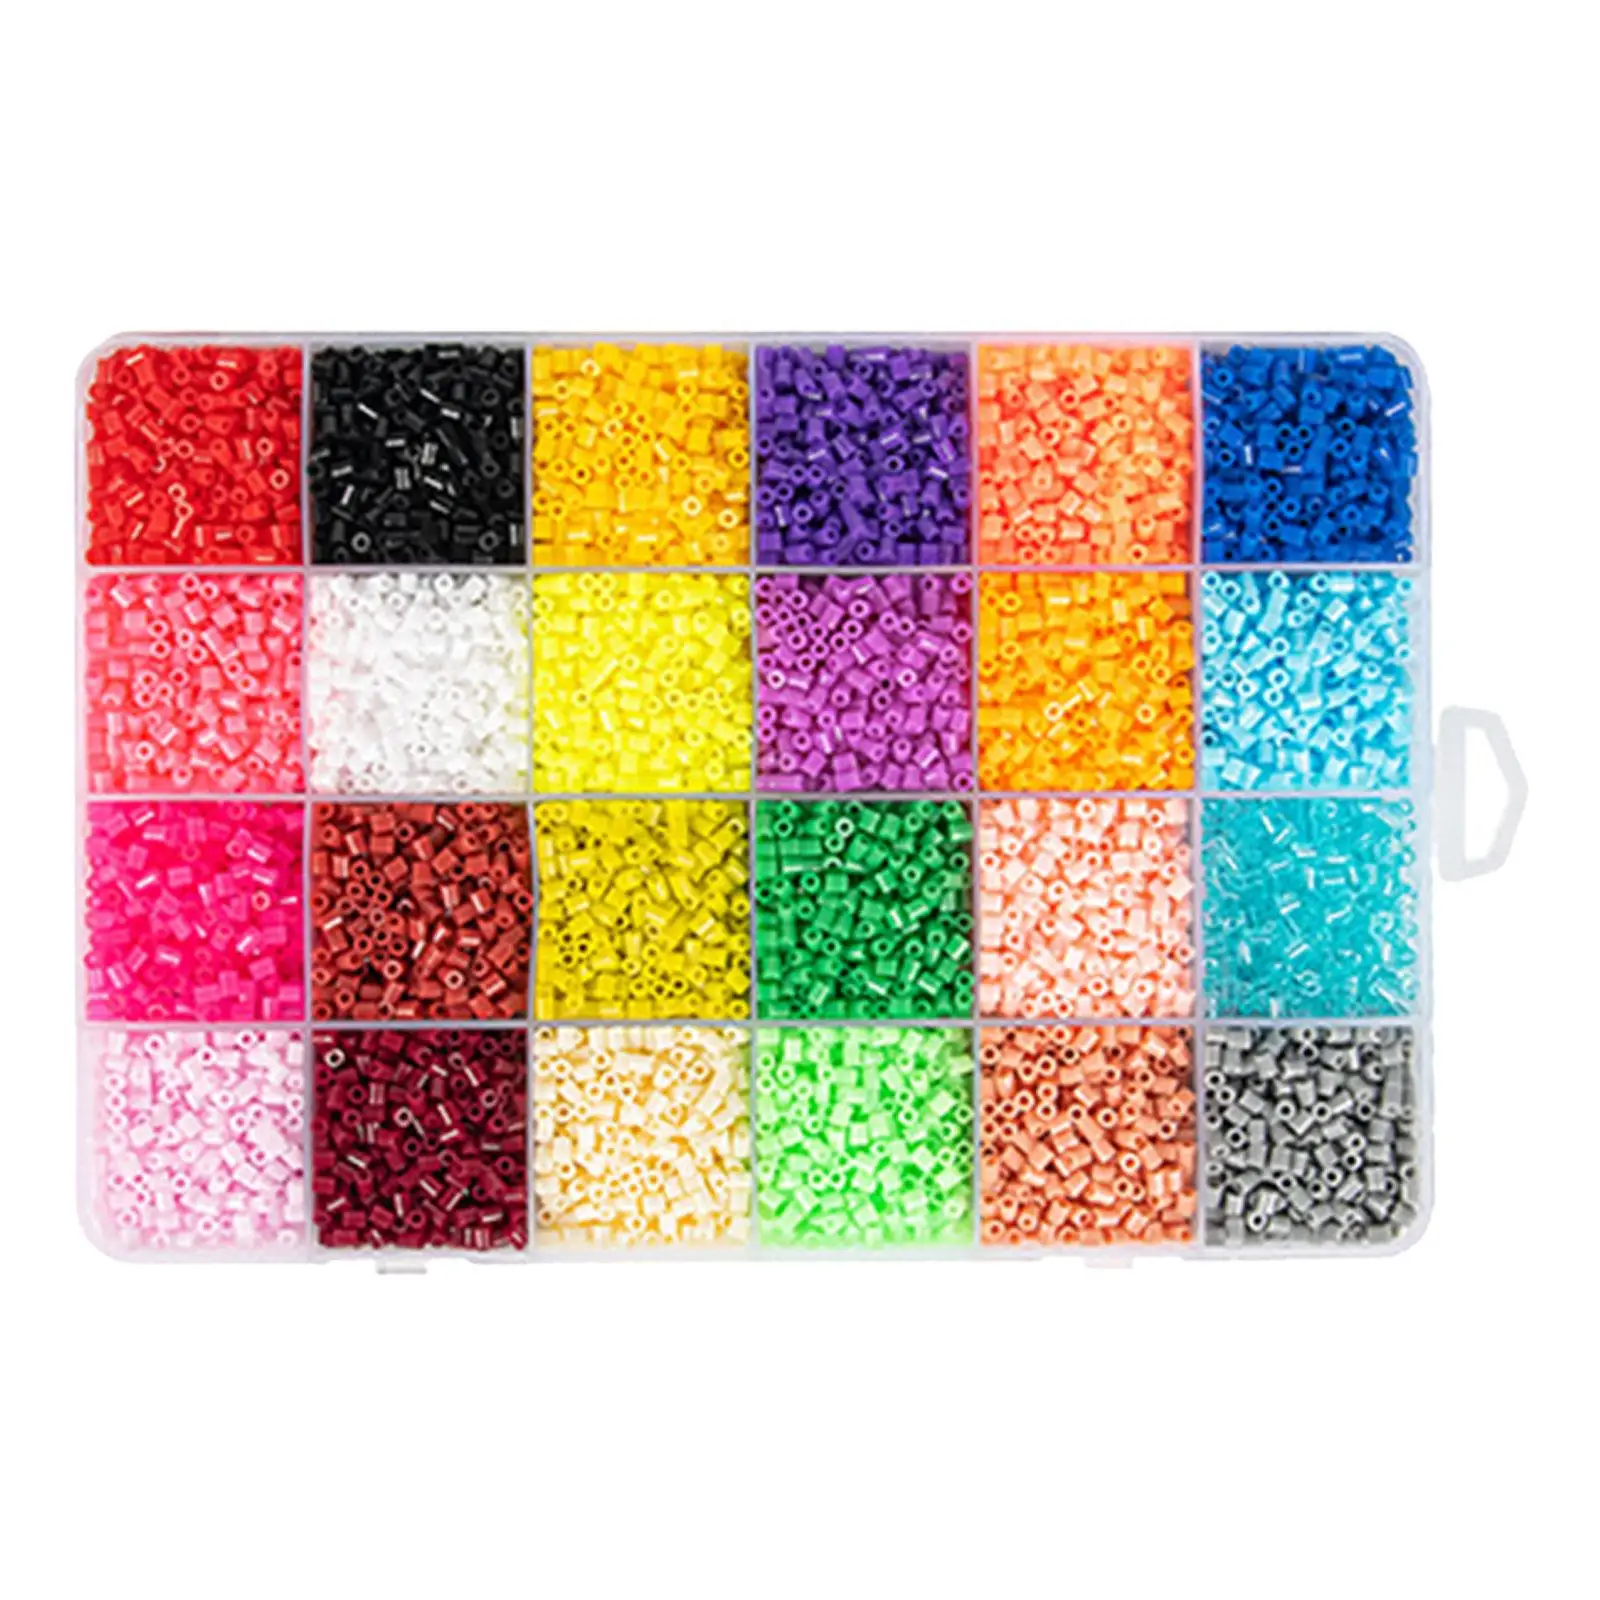 39000Pcs Fuse Beads Kit DIY Art 2.6mm Ironing Beads Educational Toys Puzzle Toys Creative for Children Girls Holiday Kids Adults